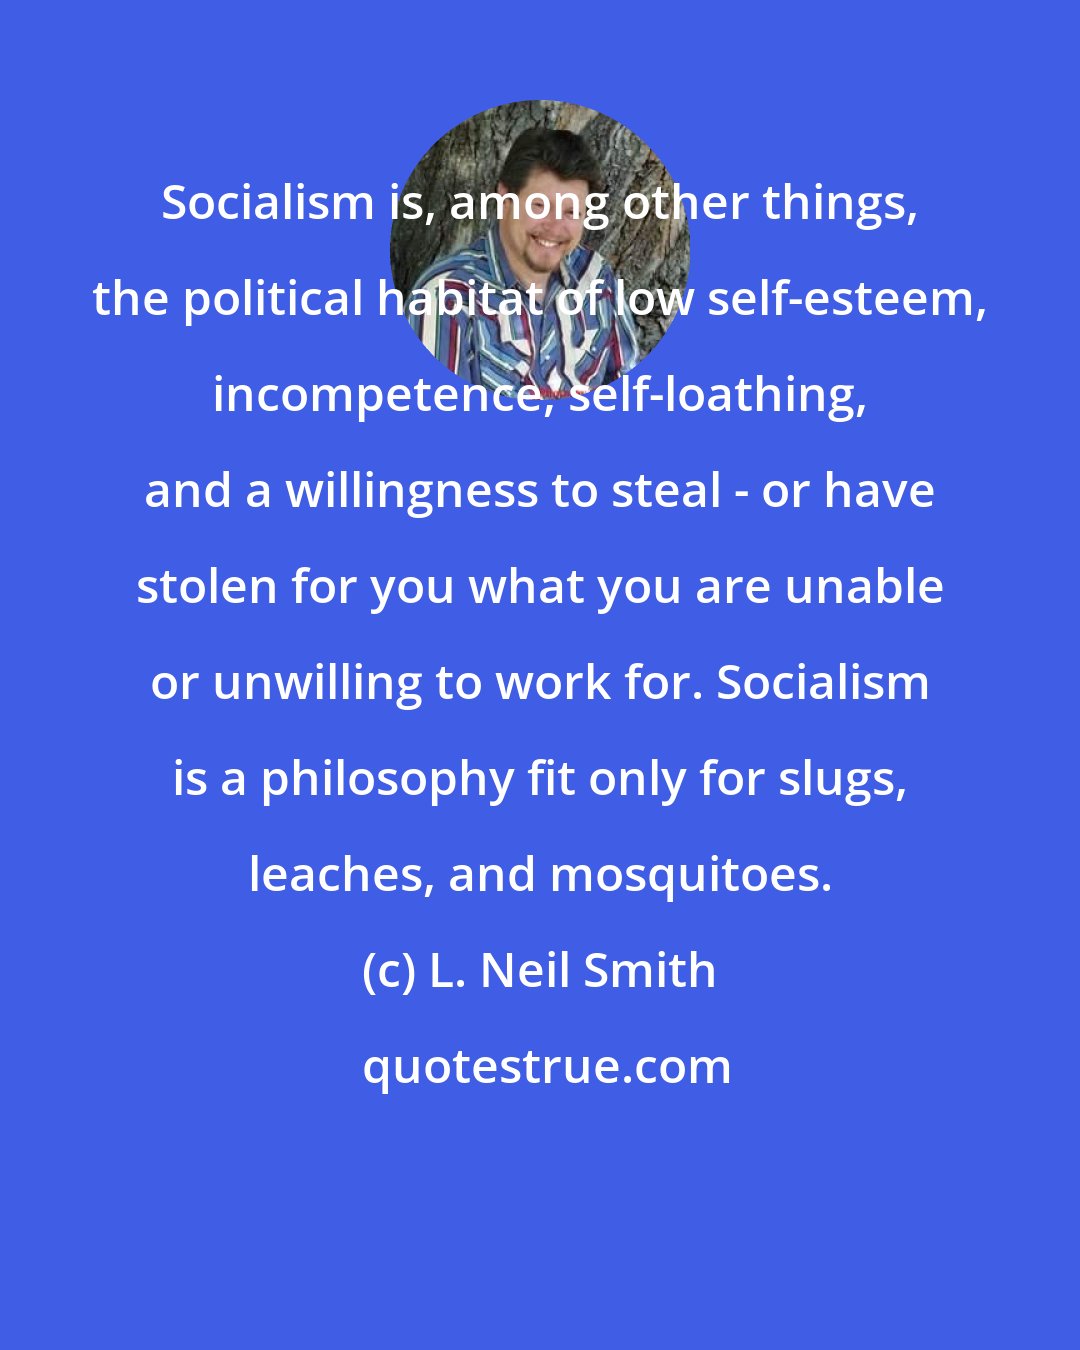 L. Neil Smith: Socialism is, among other things, the political habitat of low self-esteem, incompetence, self-loathing, and a willingness to steal - or have stolen for you what you are unable or unwilling to work for. Socialism is a philosophy fit only for slugs, leaches, and mosquitoes.